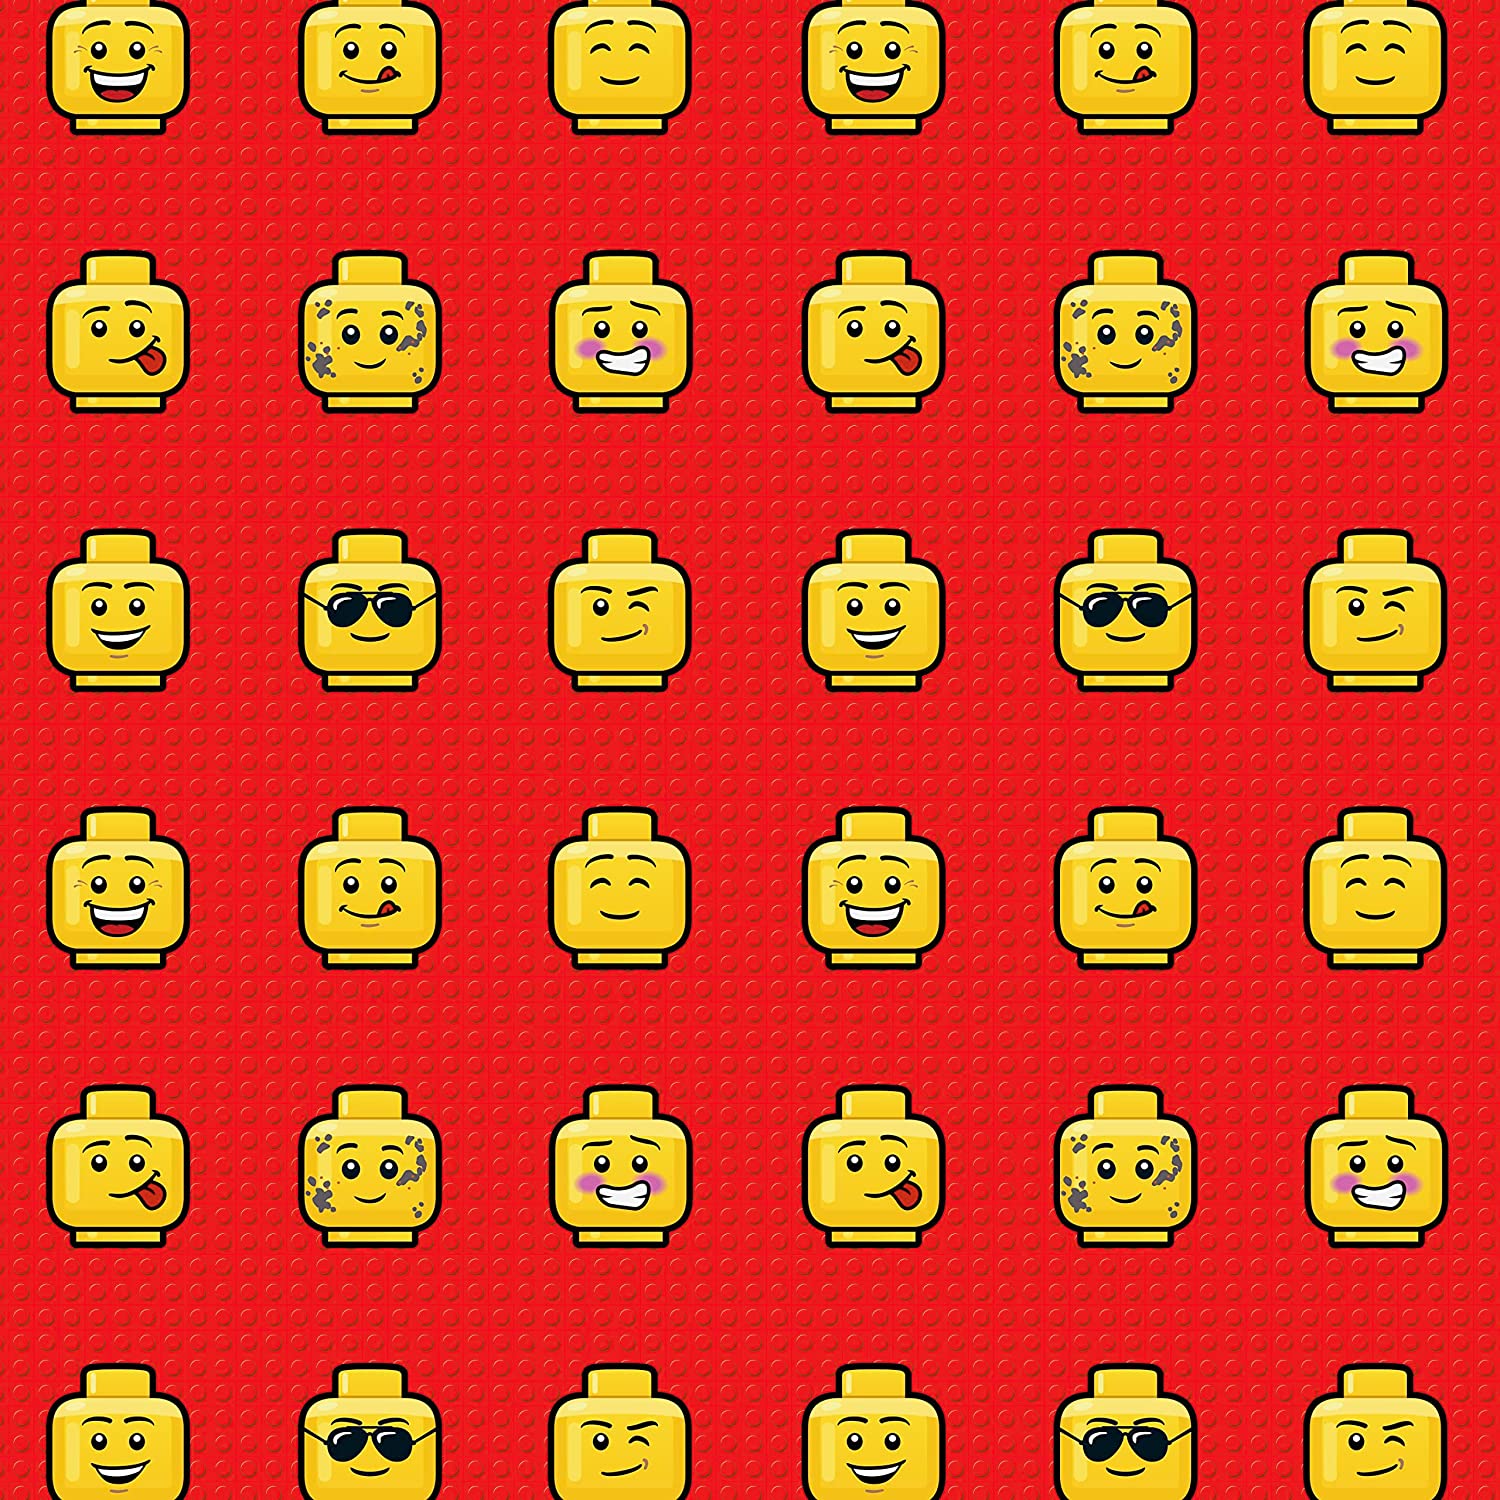 Lego wrapping paper